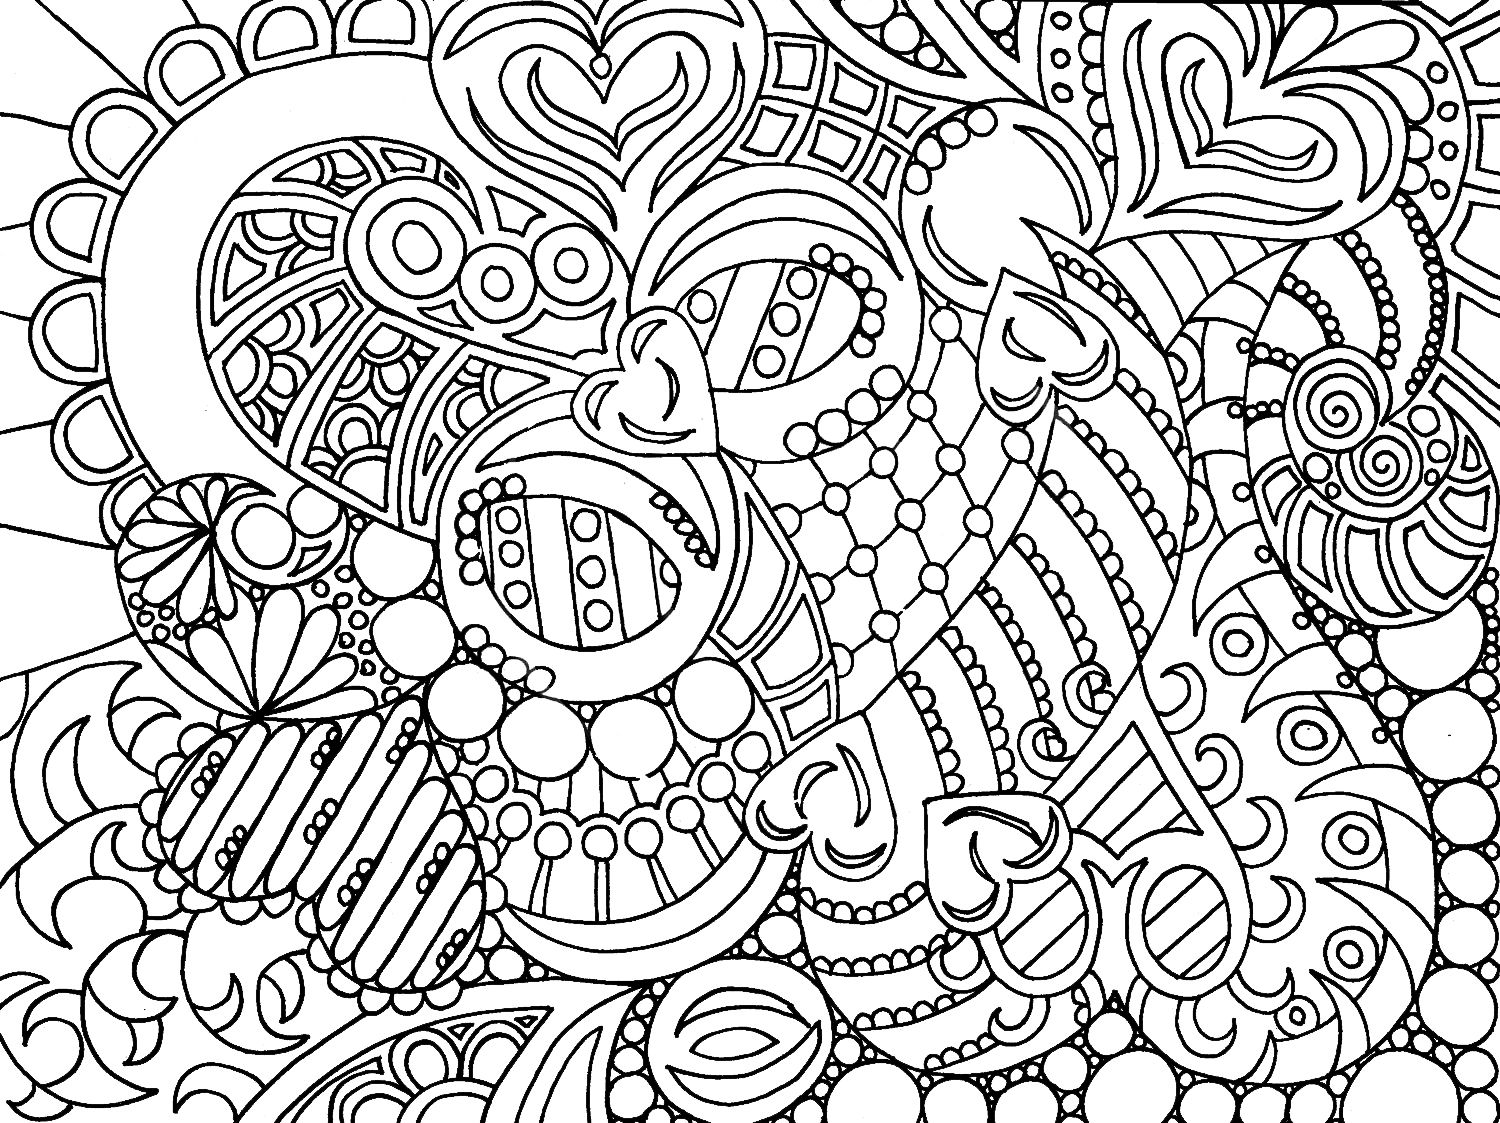 Amazing of Simple | Coloring Pages For Adults For Adult Co 